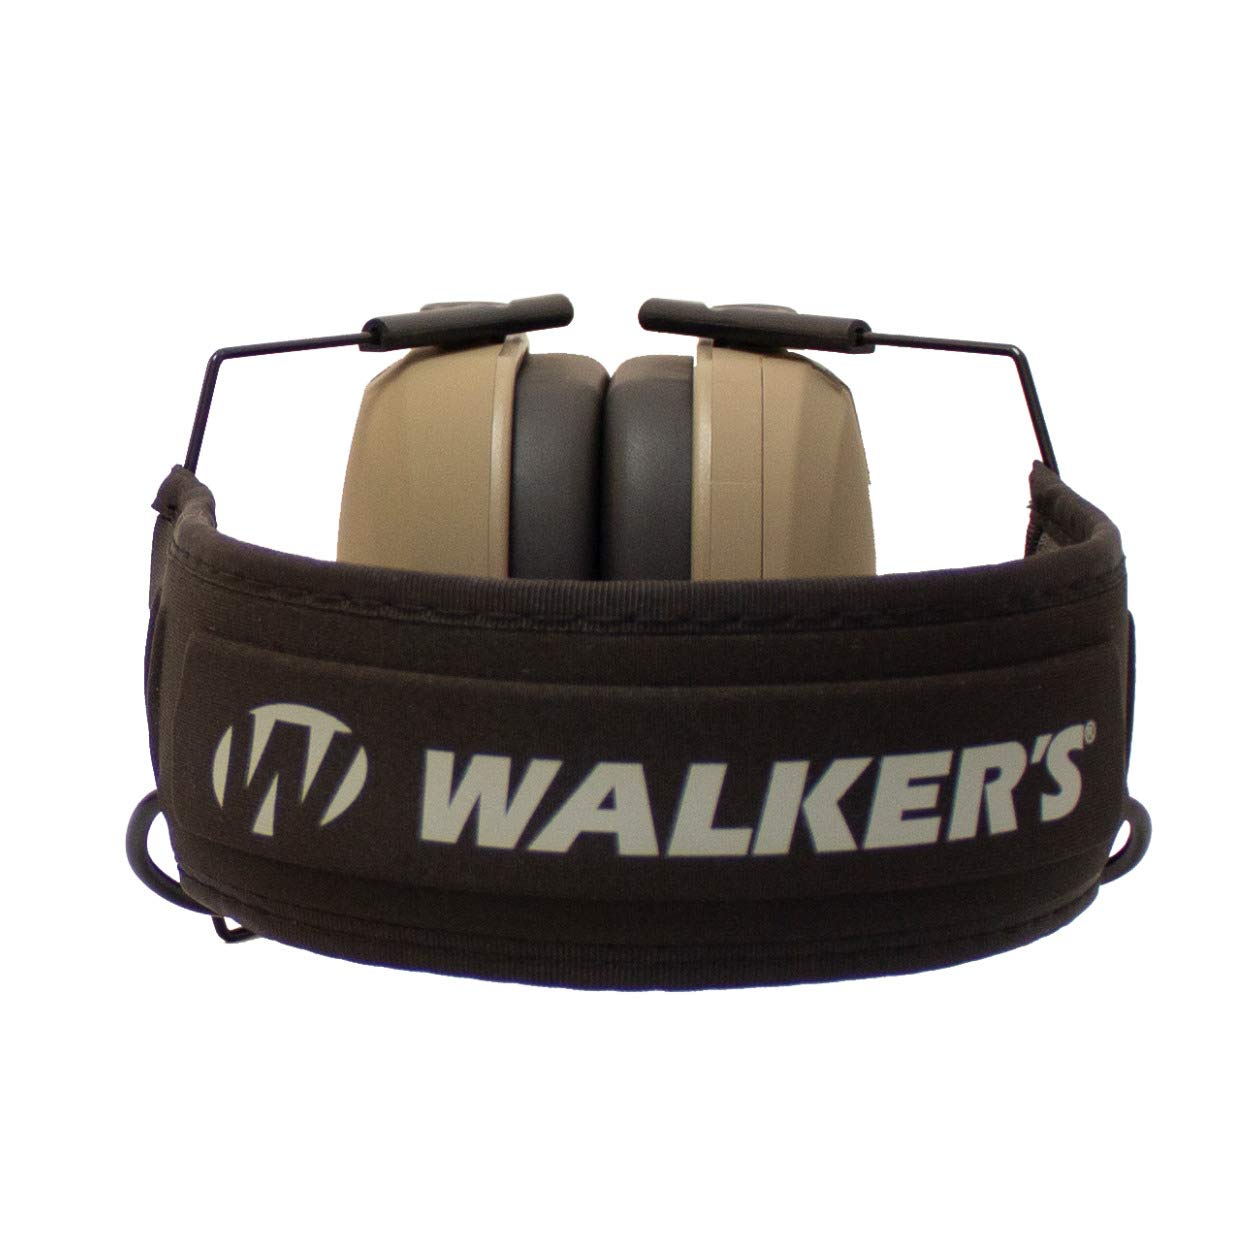 Walkers Razor Slim Electronic Shooting Hearing Protection Muff (Sound Amplification and Suppression) with Protective Case